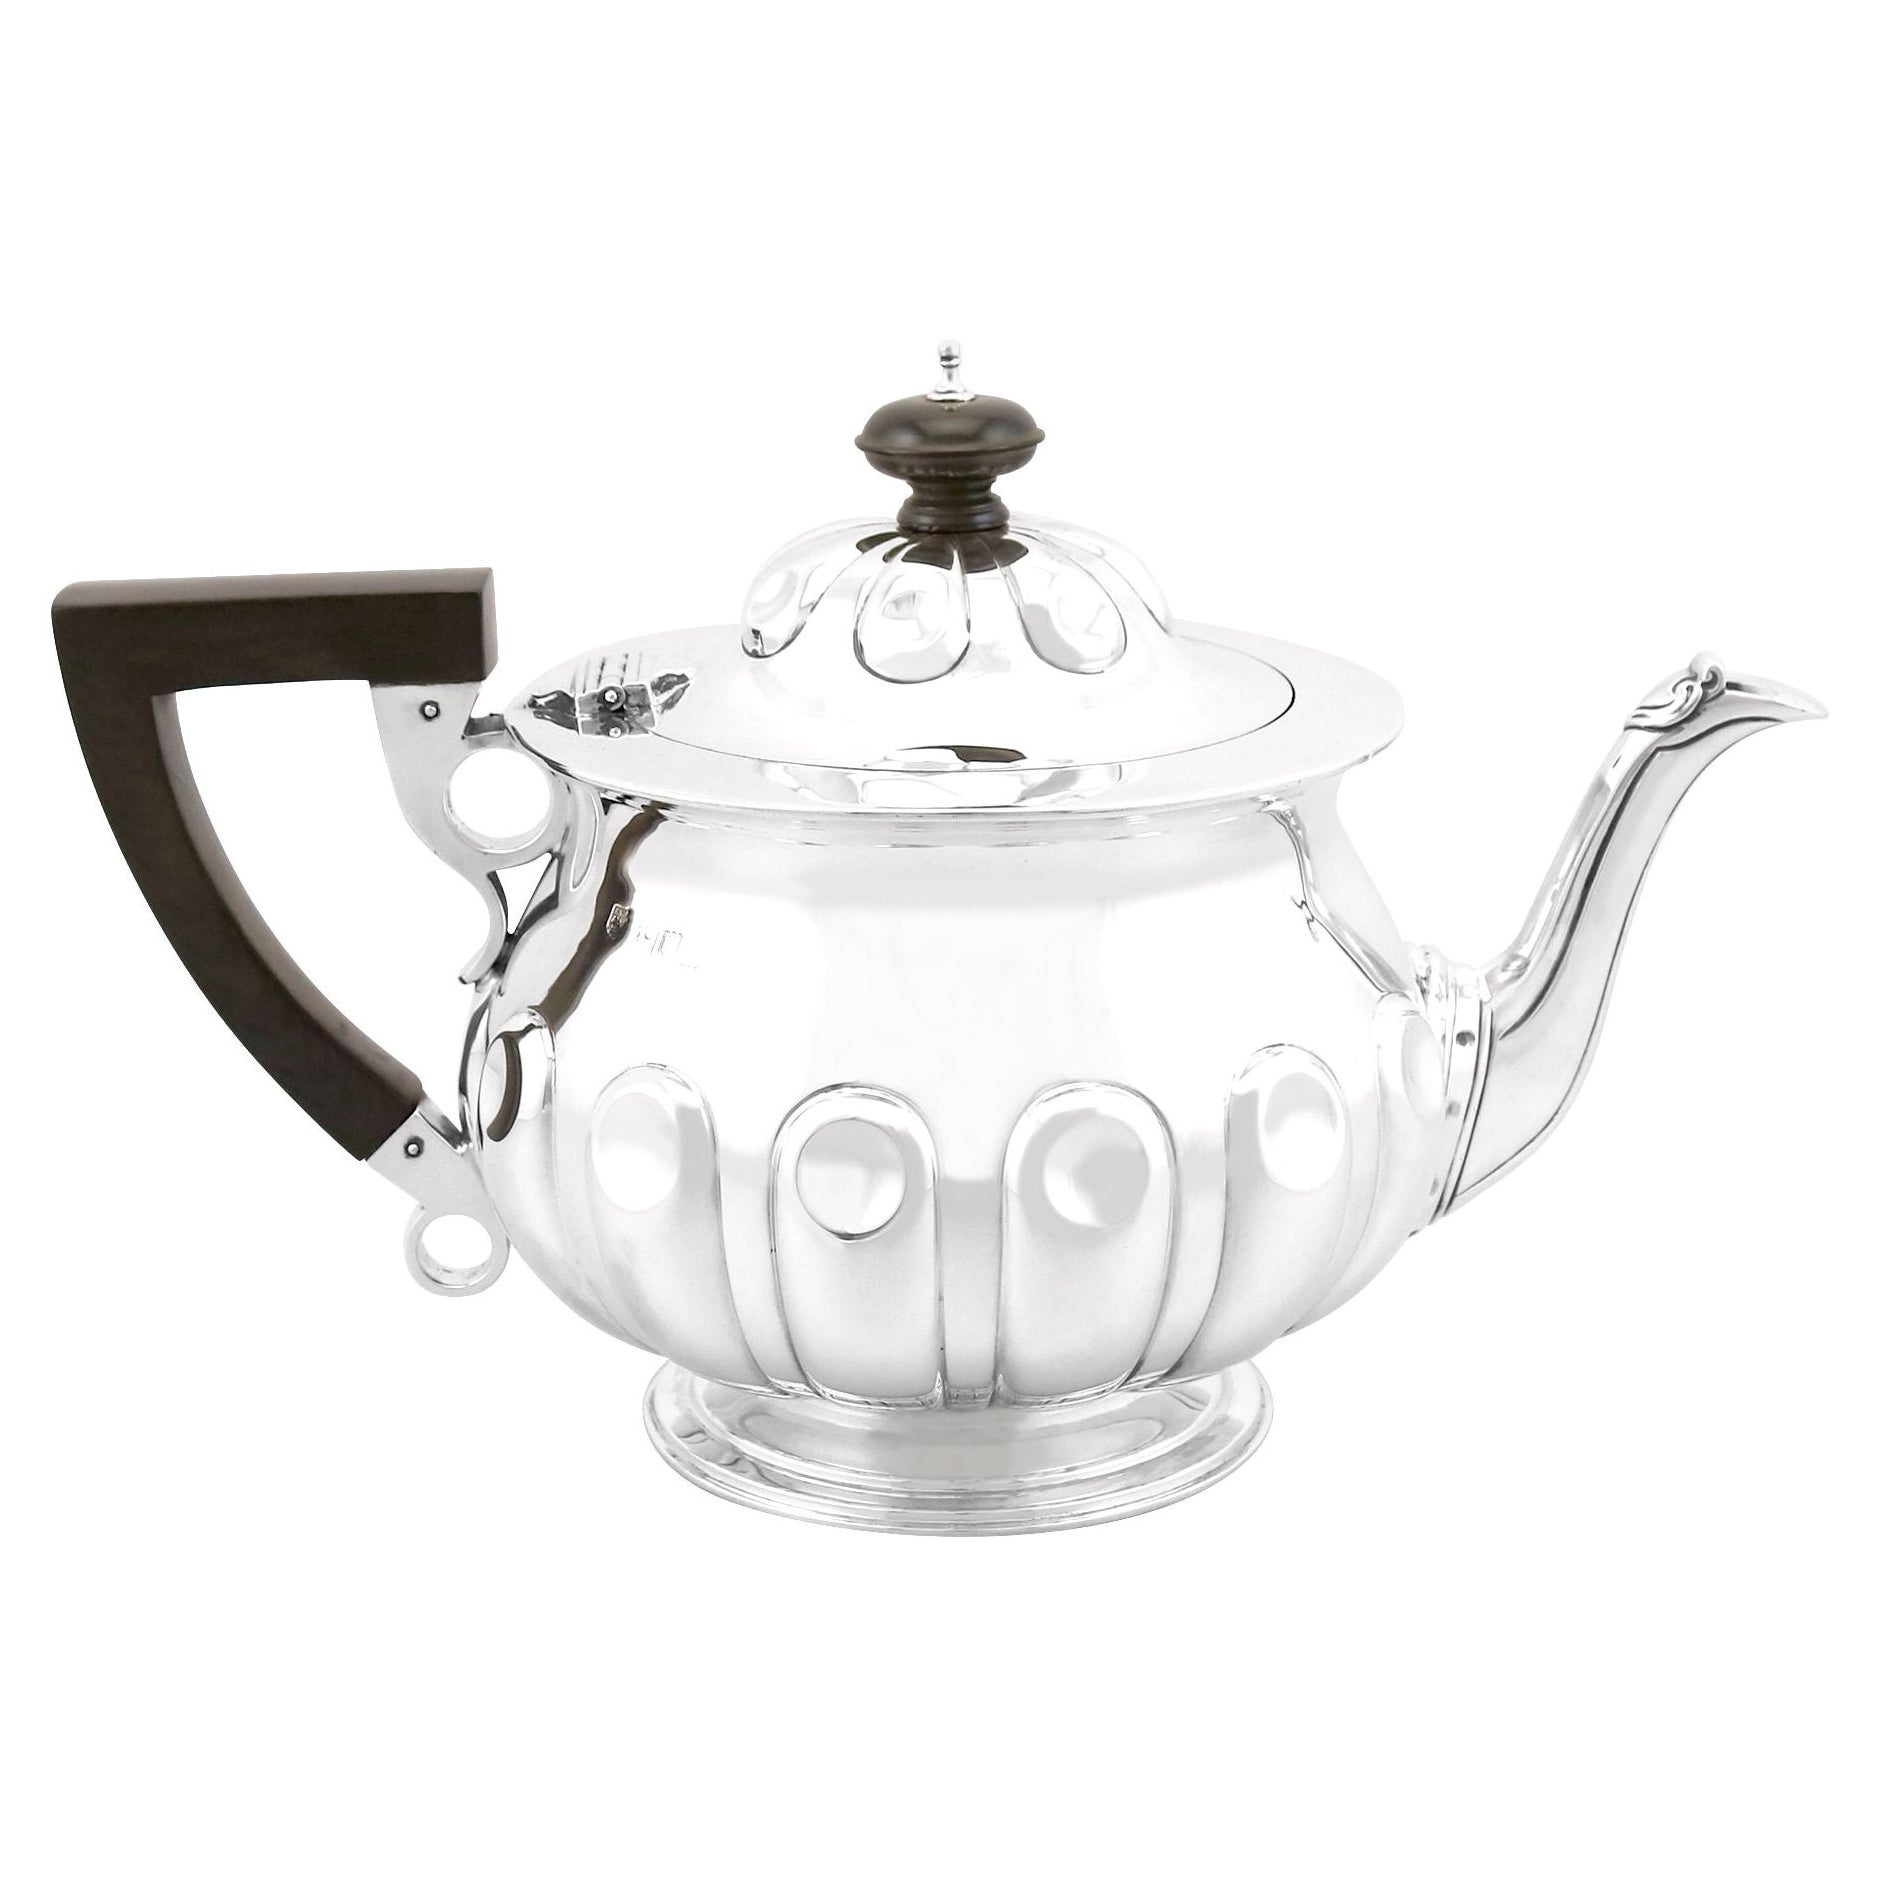 Antique Edwardian Arts & Crafts Style Sterling Silver Teapot by Reid & Sons